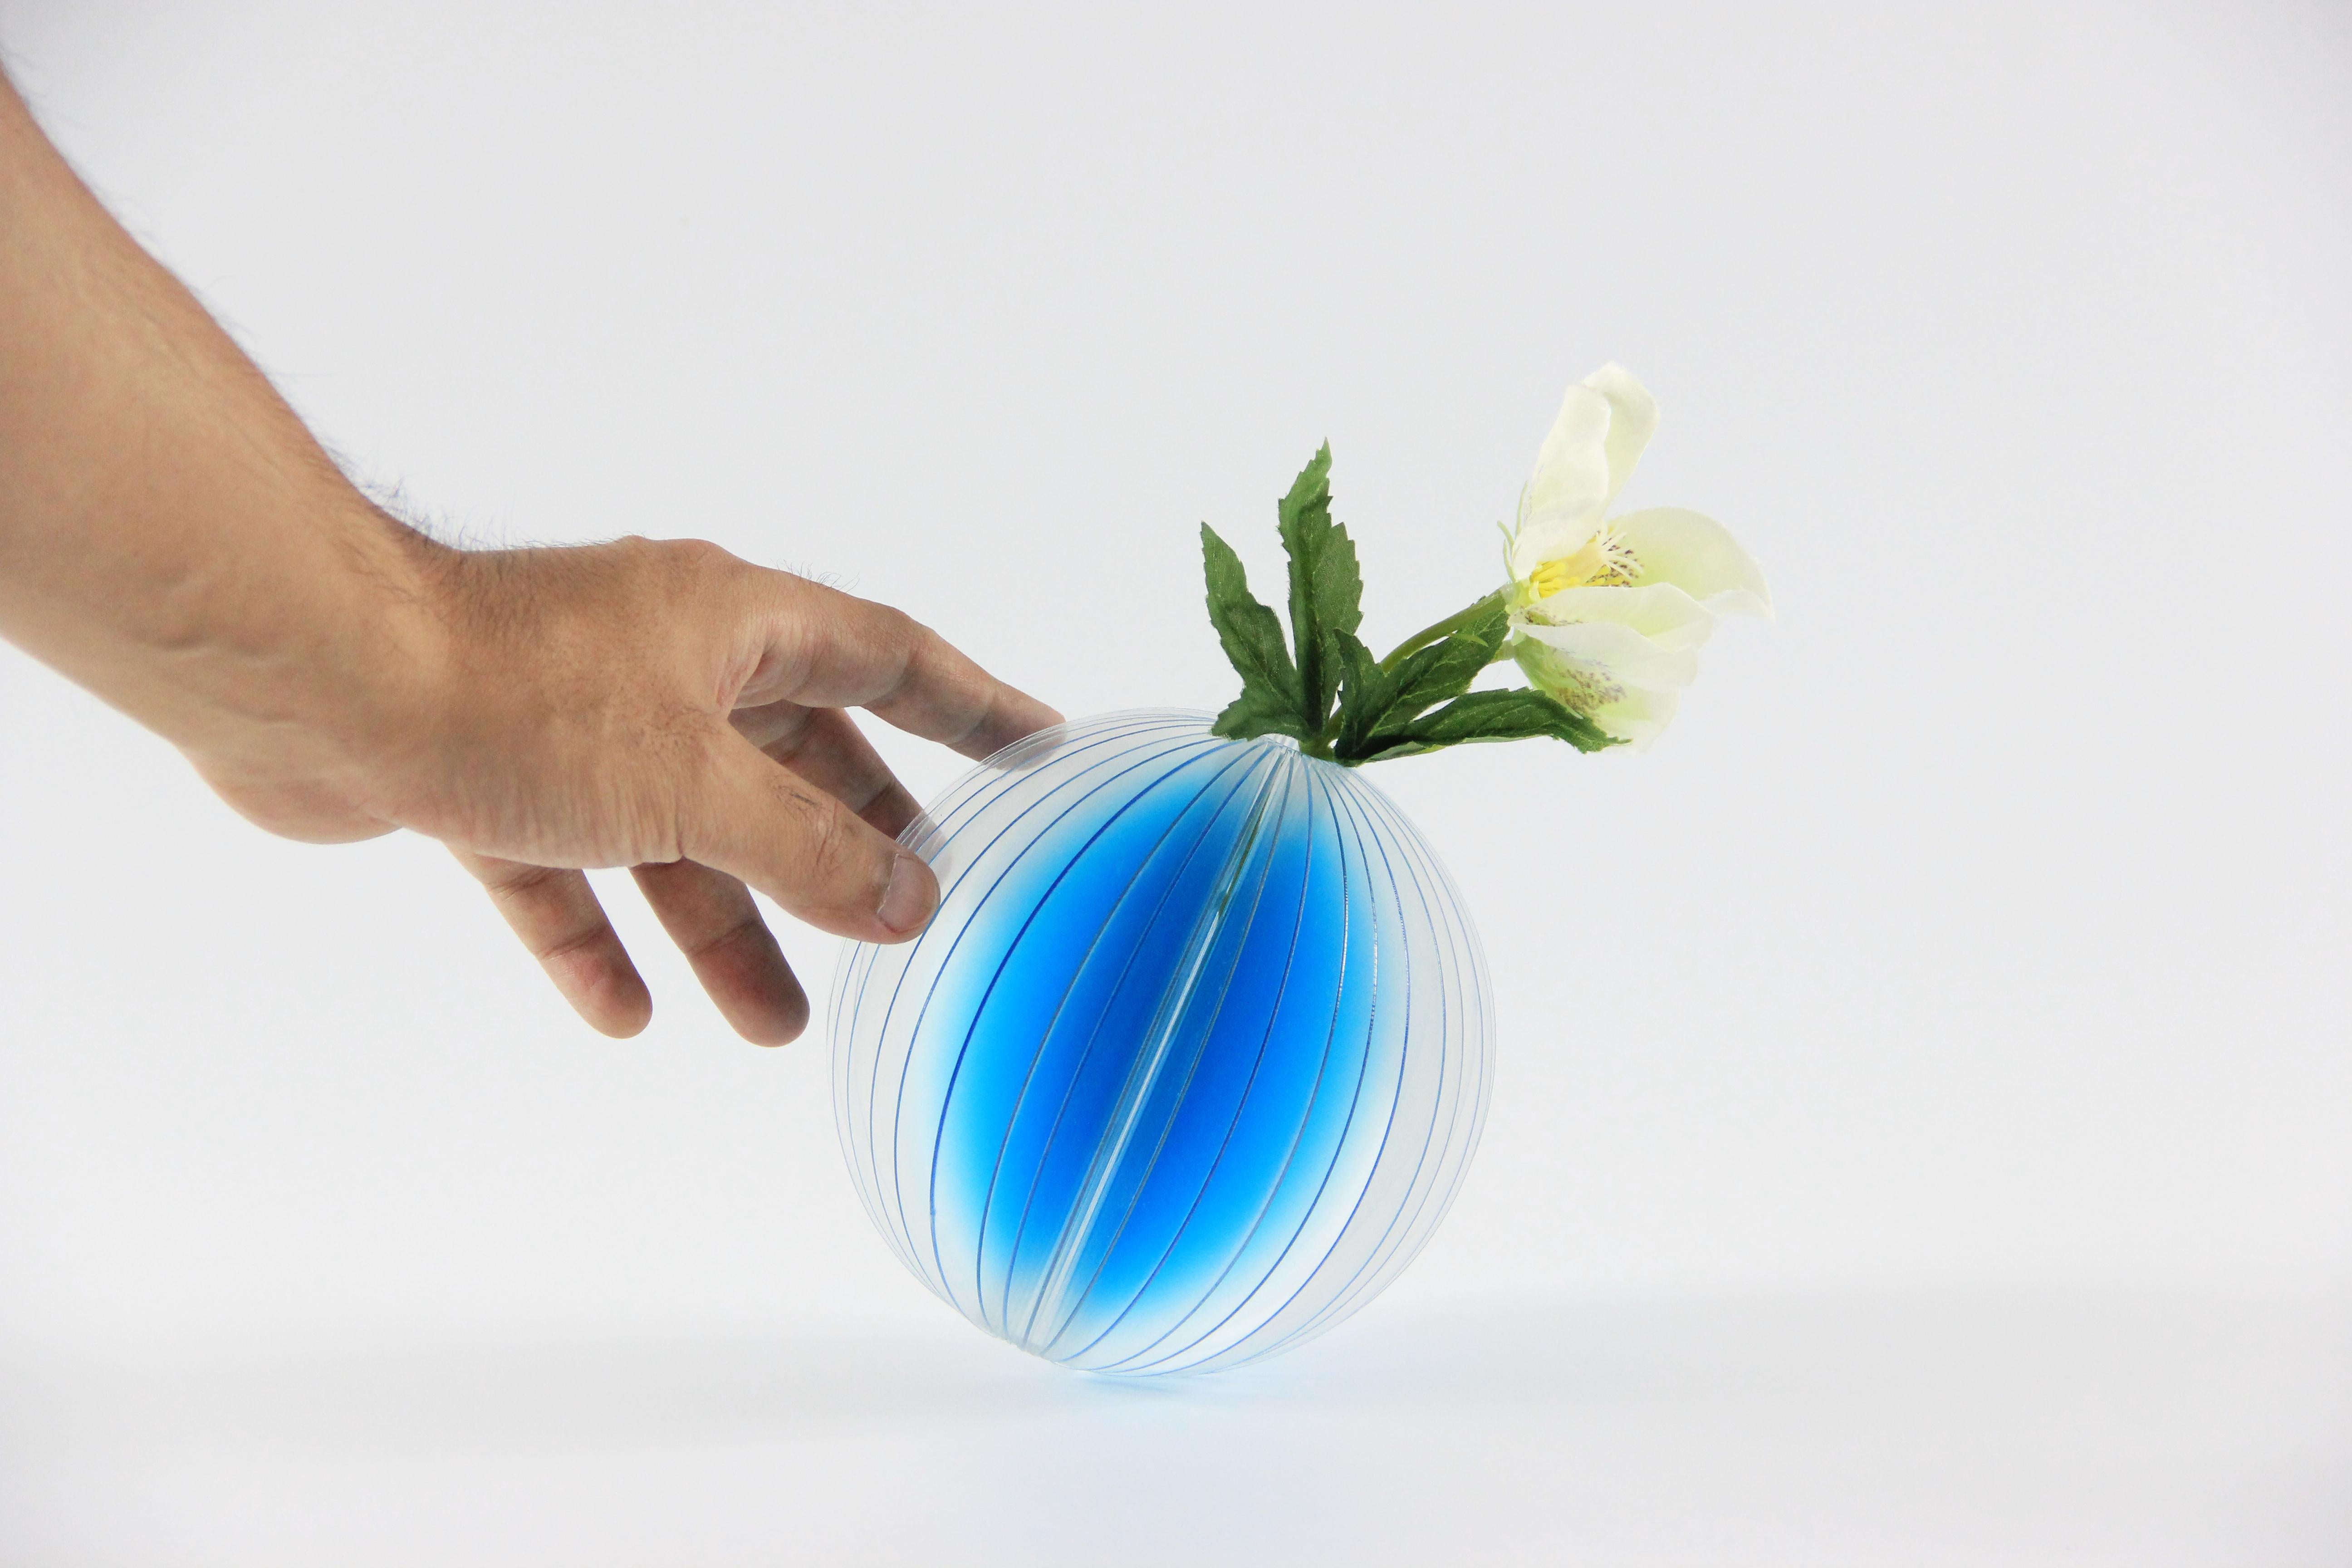 Lightness vases are inspired by an accidental scene. When light is projected into the space which is layered , the wonderful imagination is beginning. The vases feature gradations of colors that optically change depending on the light hitting